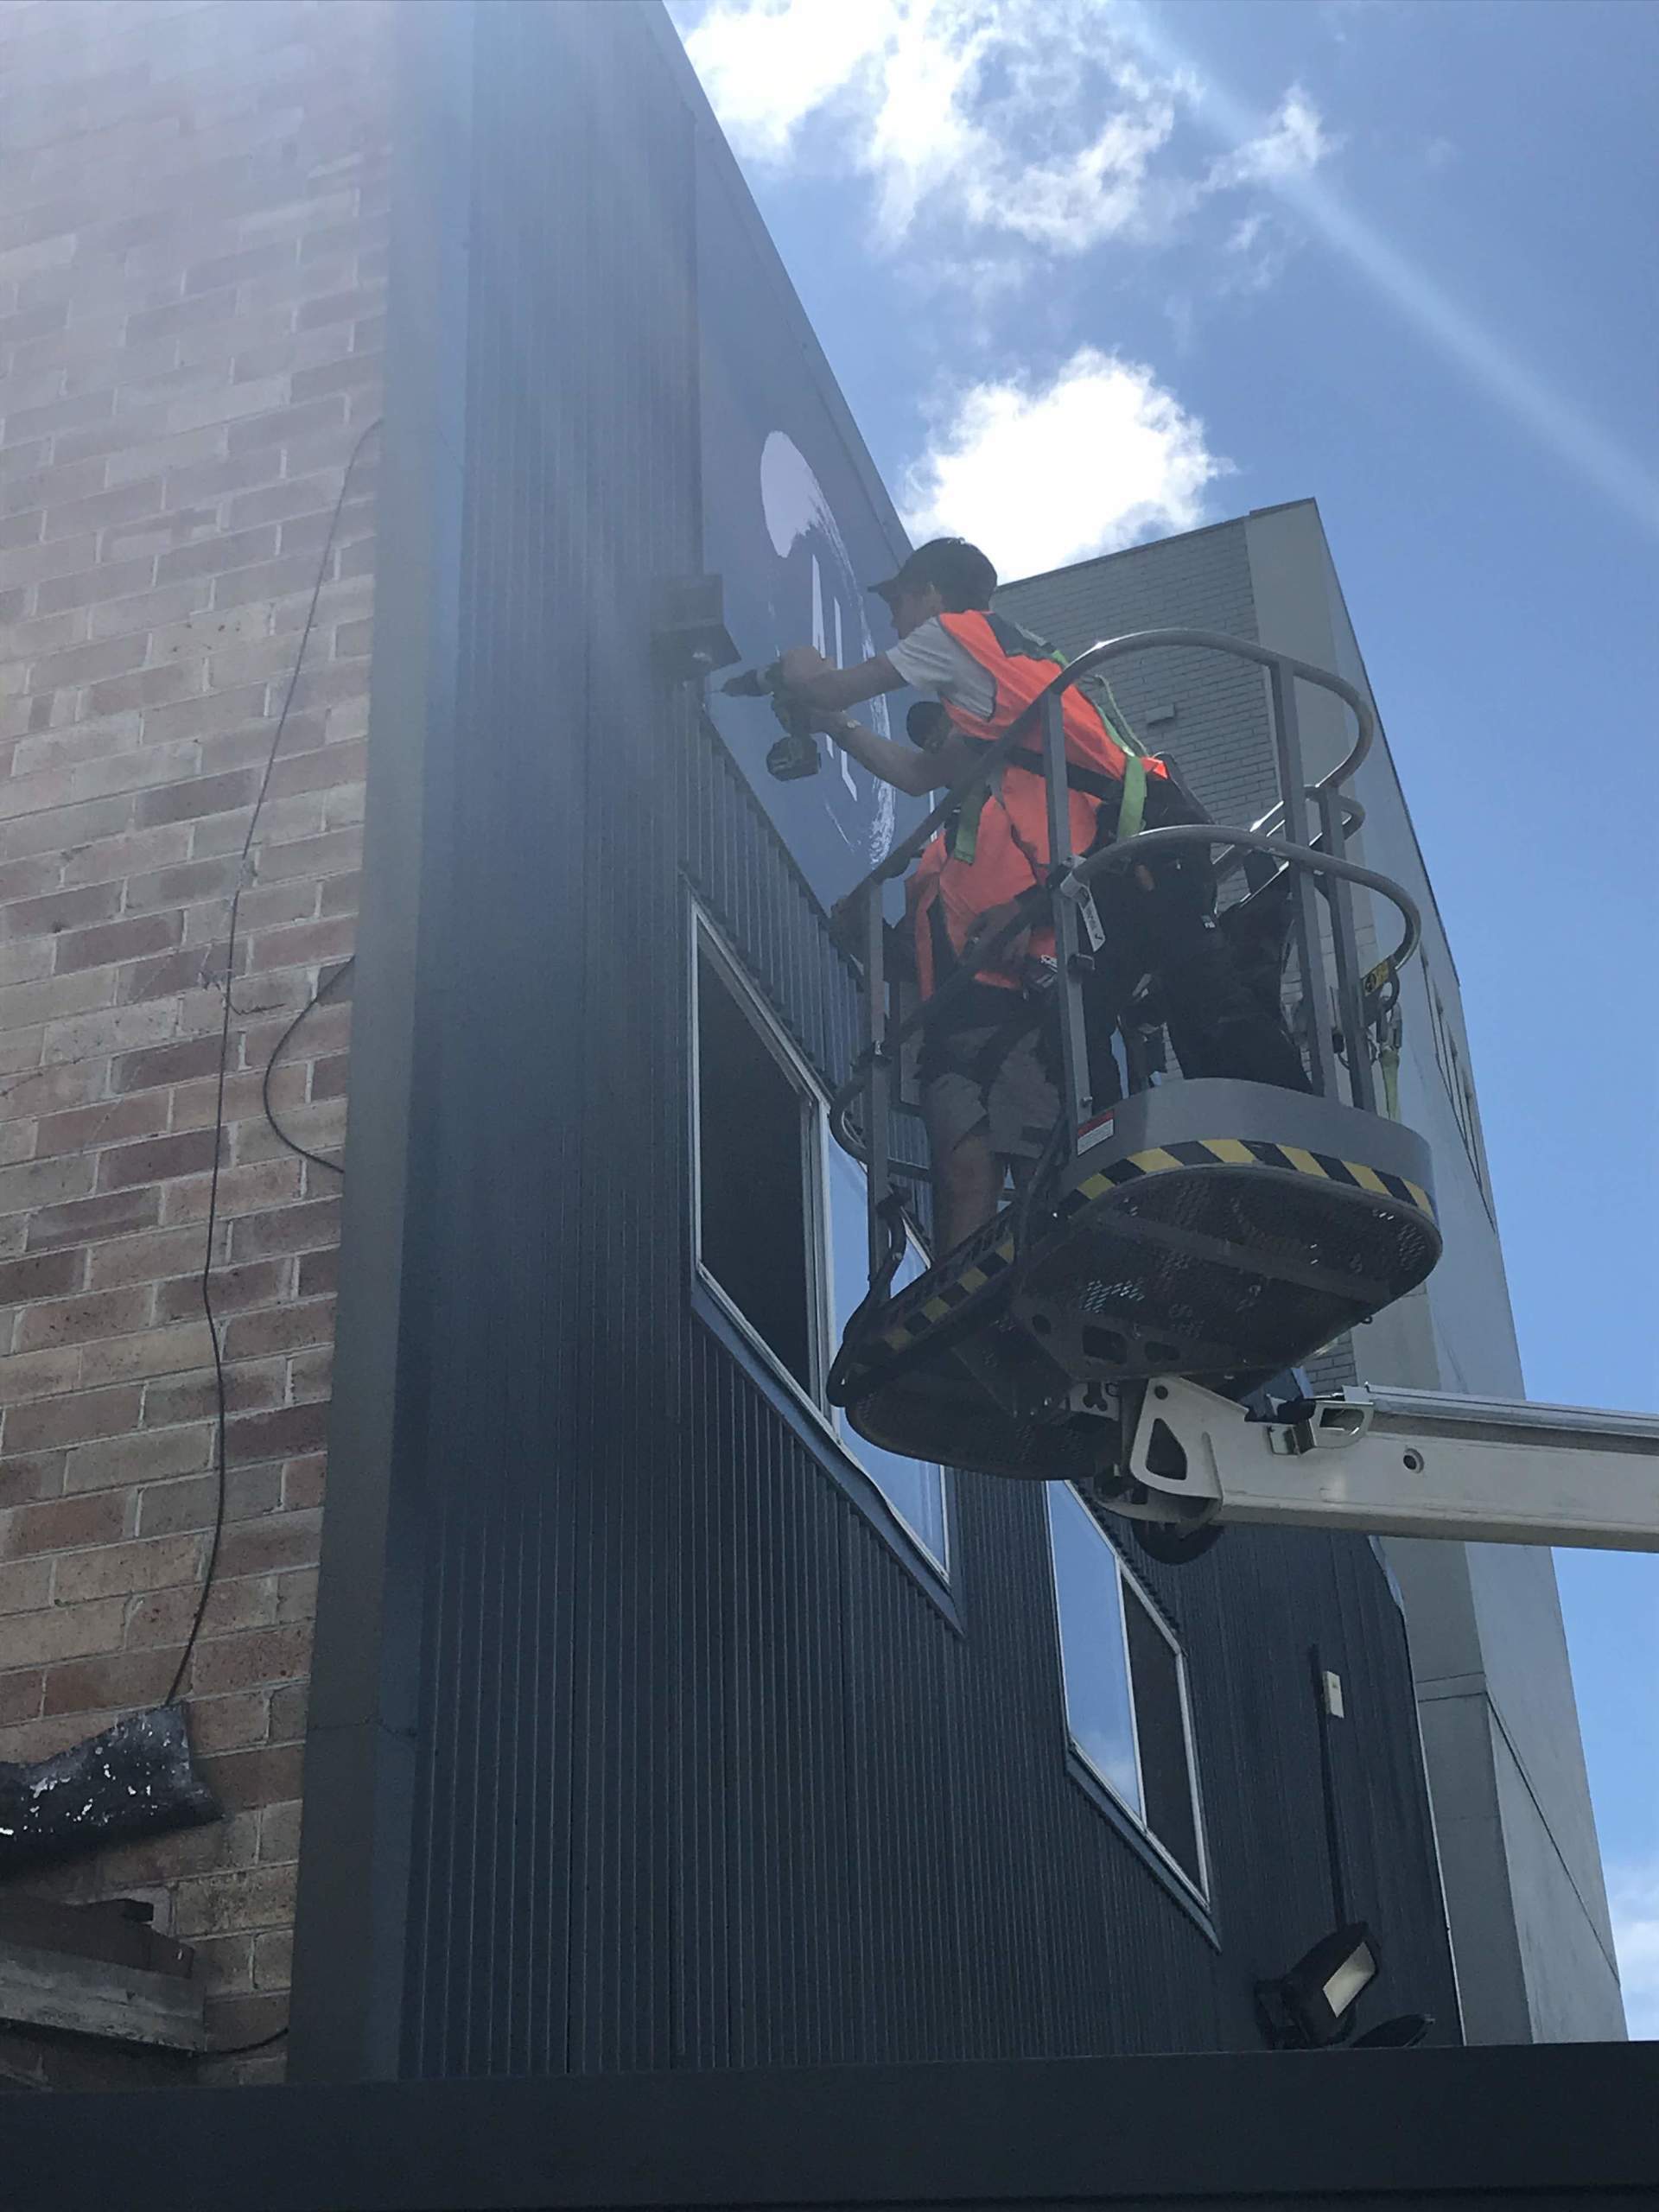 a man is working on the side of a building on a lift .